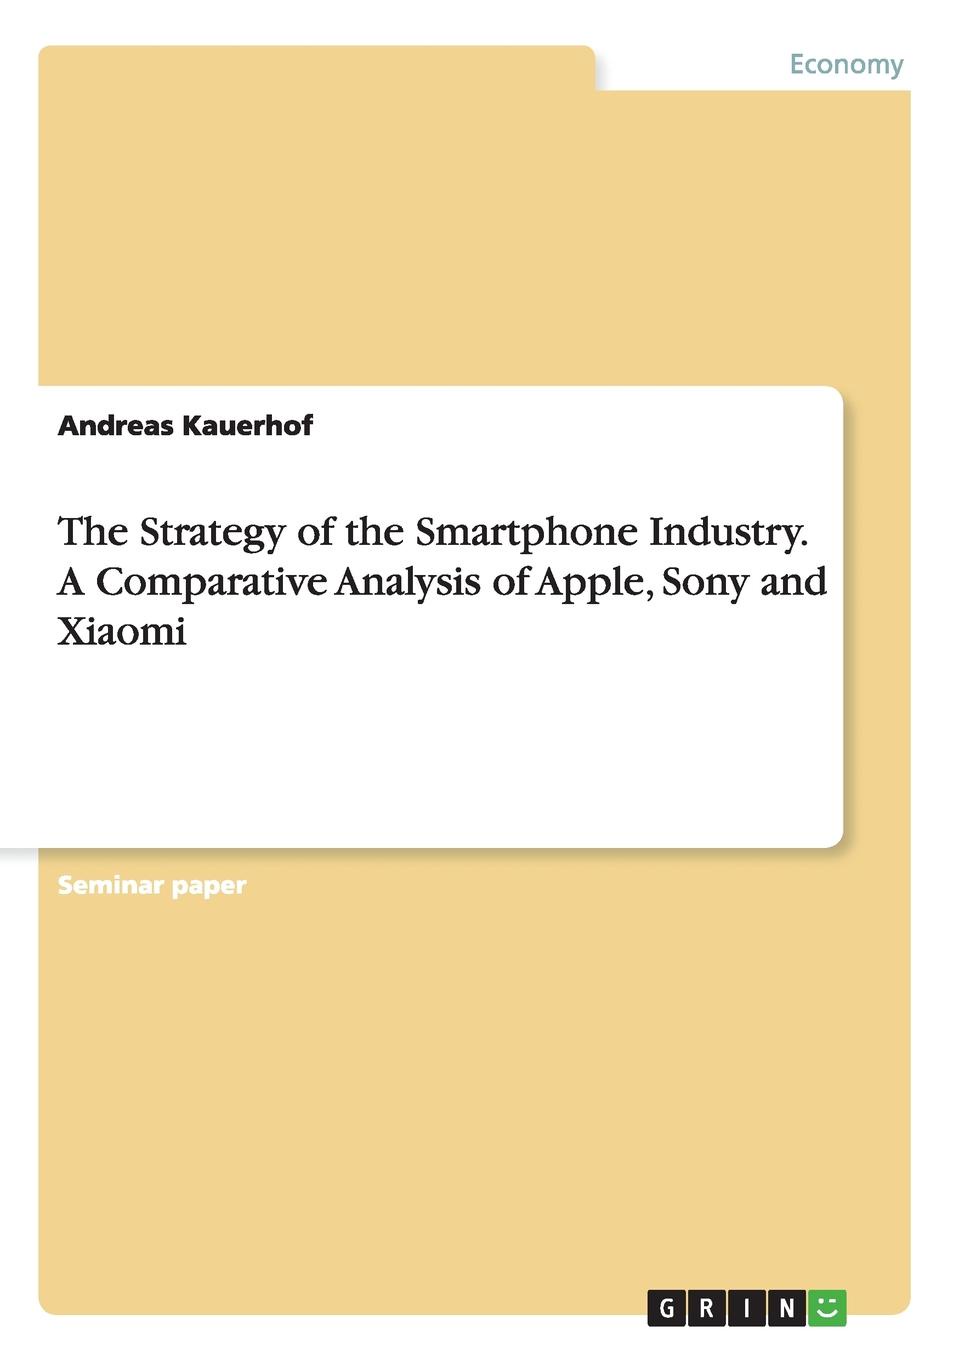 The Strategy of the Smartphone Industry. A Comparative Analysis of Apple, Sony and Xiaomi